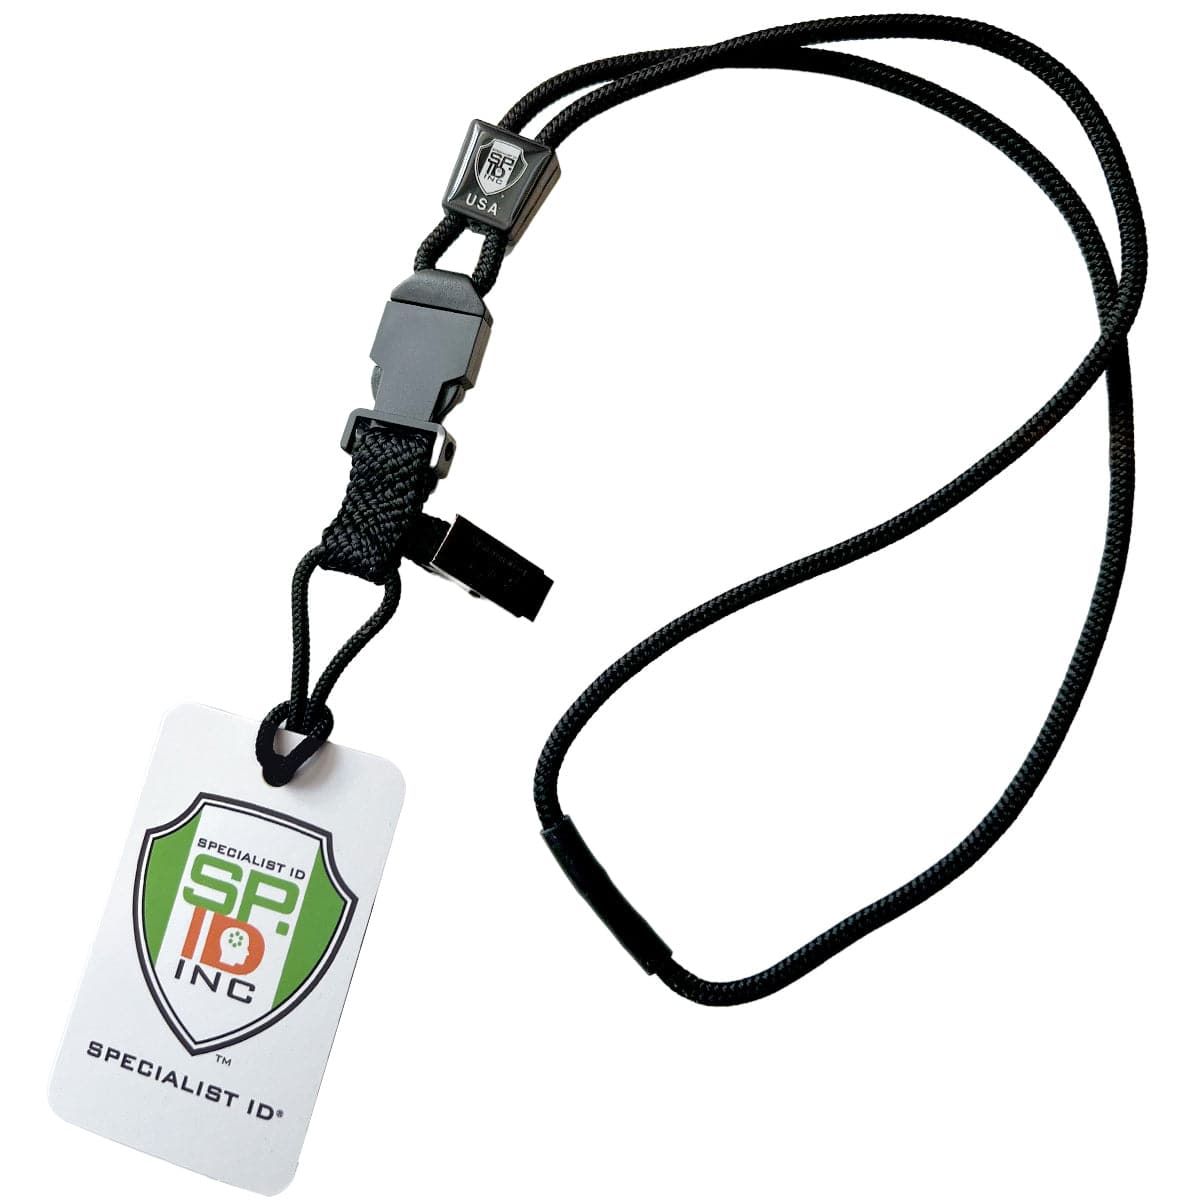 A Black EK Lanyard Plus with Soft End And Fused Clip (10761) by EK USA is attached to a white ID card featuring a colorful logo of "Specialist ID Inc.